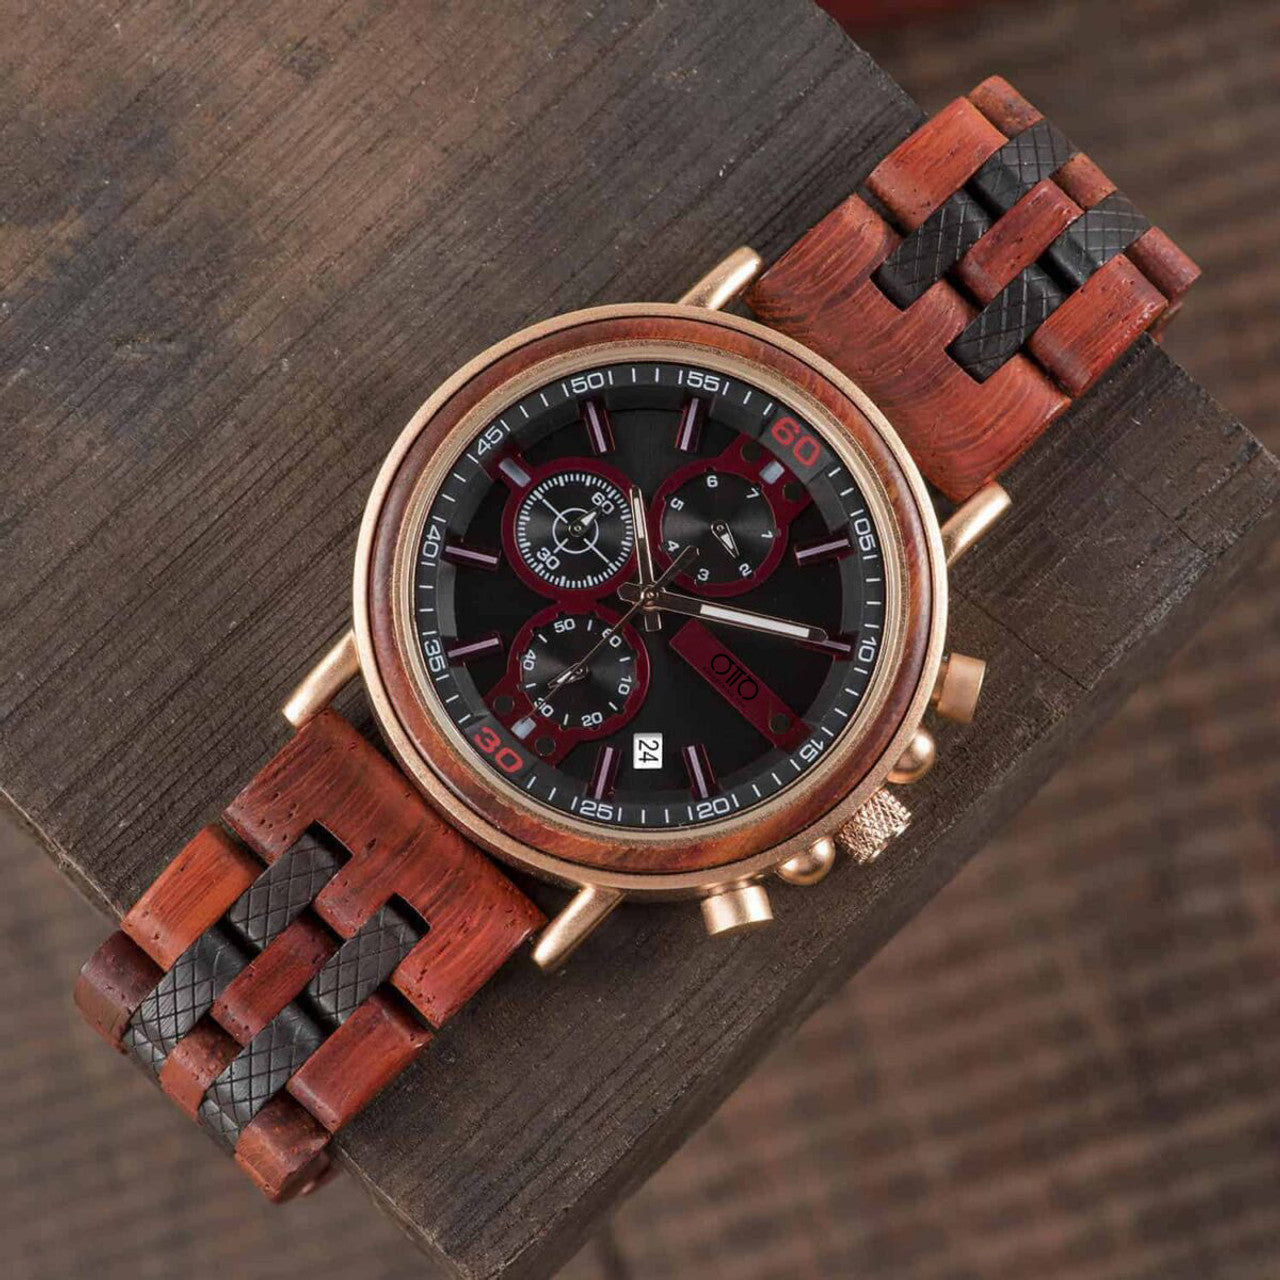 OTTO Wood Watch - Amaranth Wood and Stainless Steel Handmade Men’s Wooden Watches – Gawaine S18-5